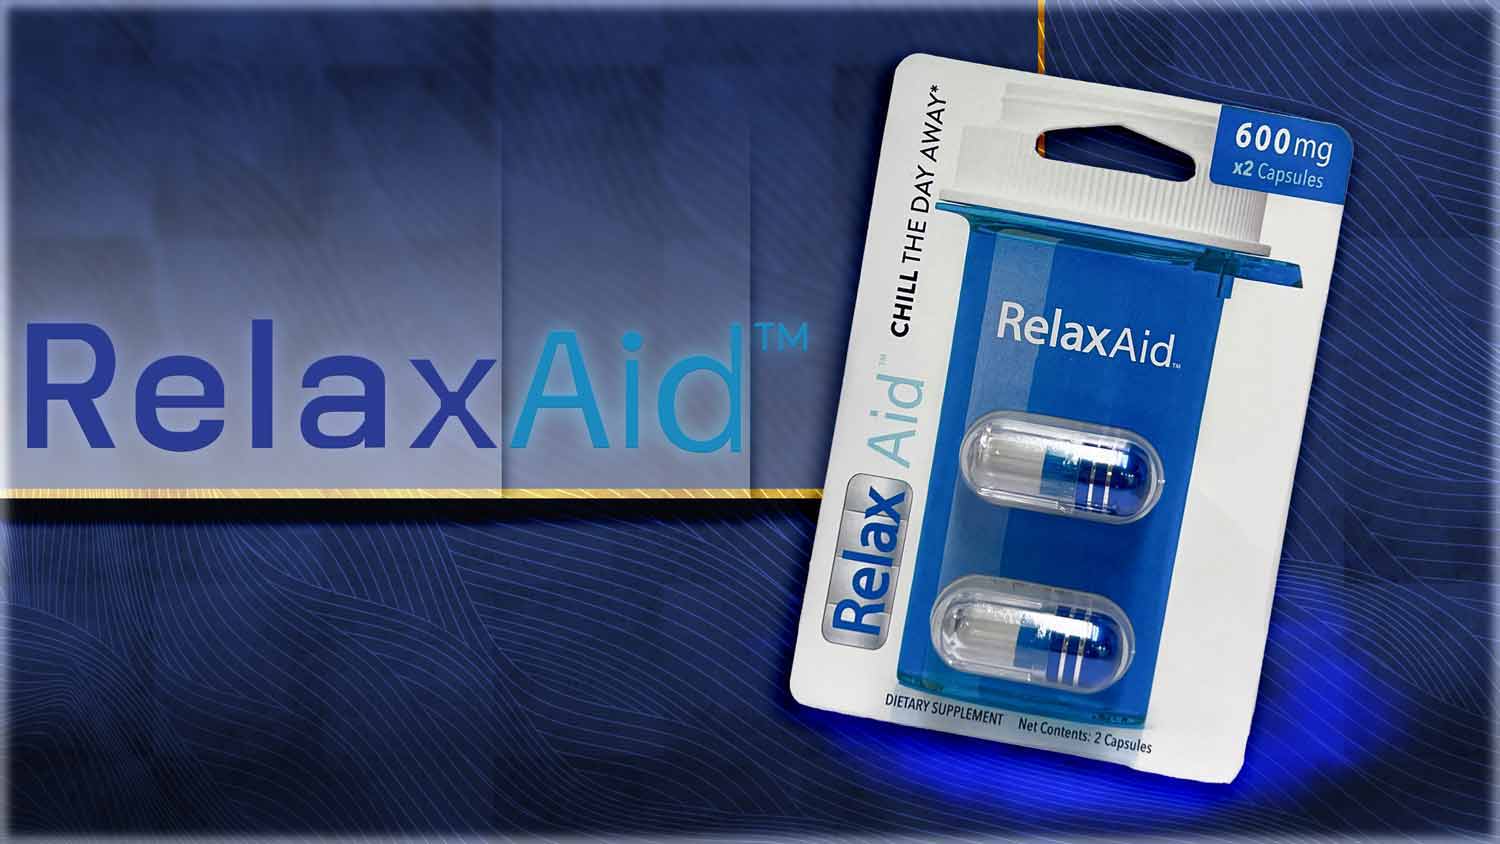 Addall RelaxAid 600mg Capsules 2 ct